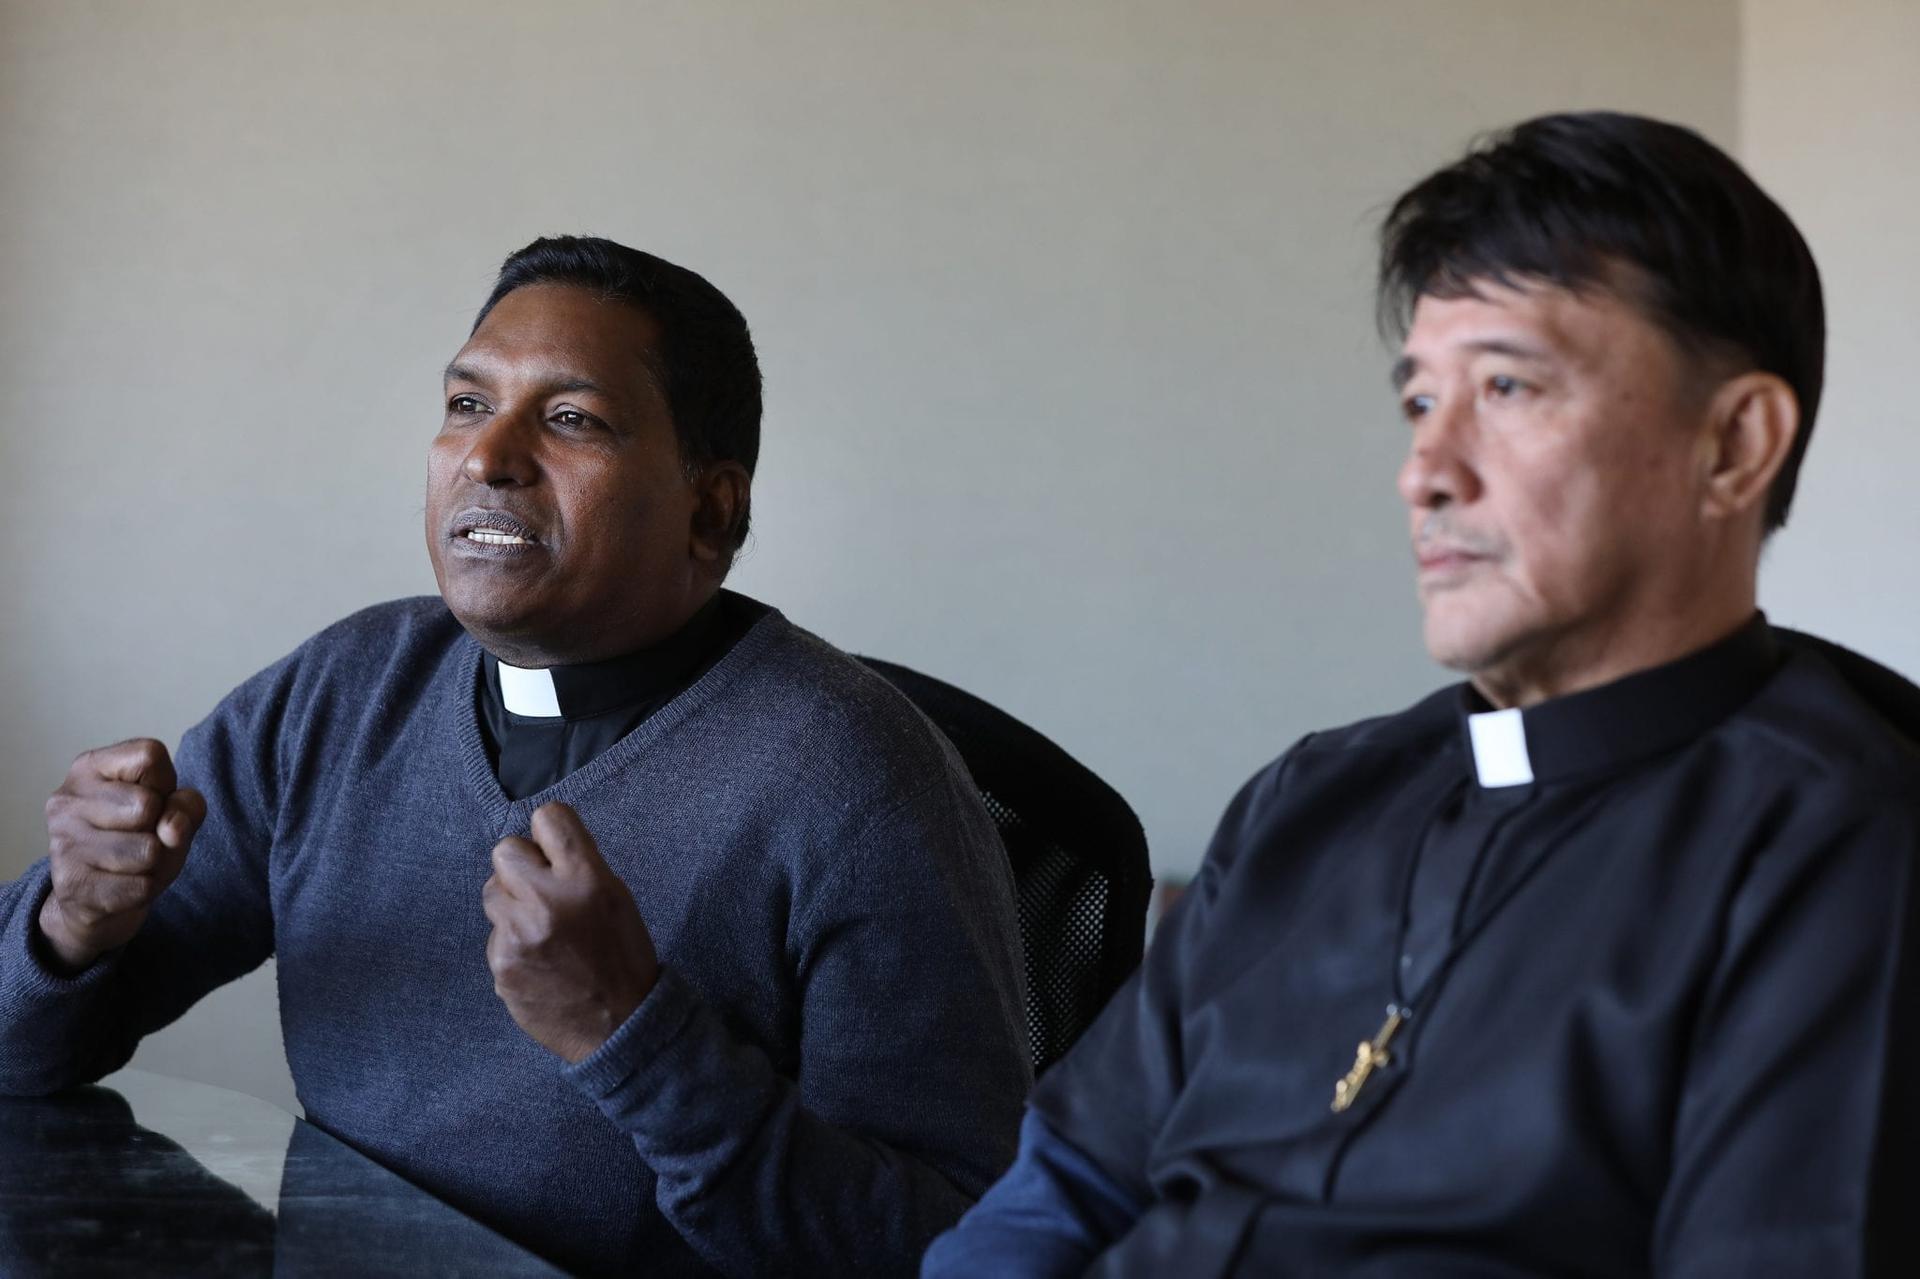 Persecution has ‘strengthened the prophetic role of church’ in Asia, priests say